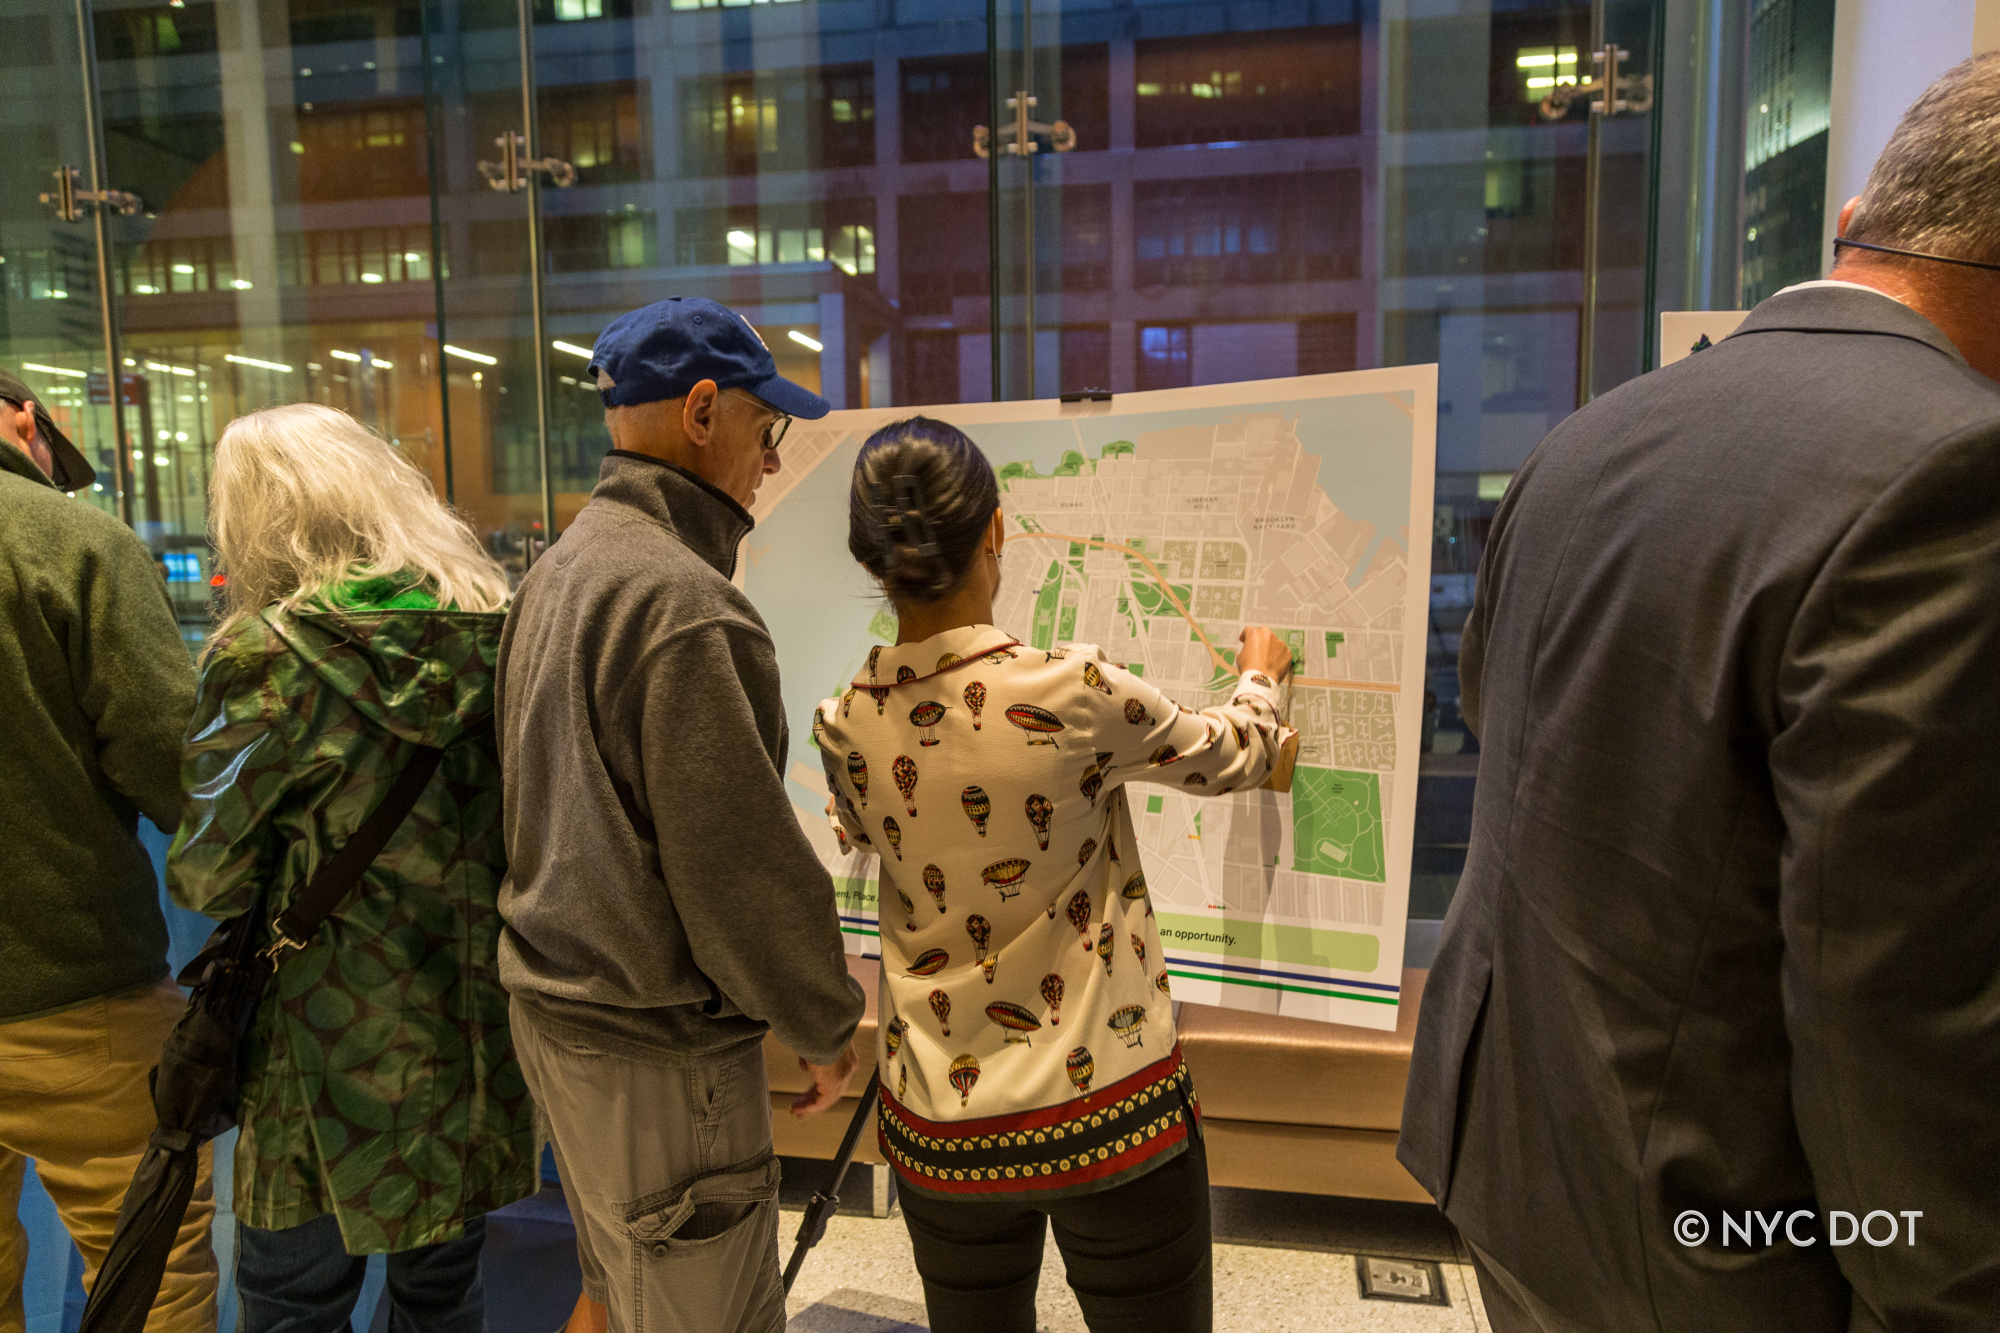 A city planner points at a map next to a member of the public at a public workshop.